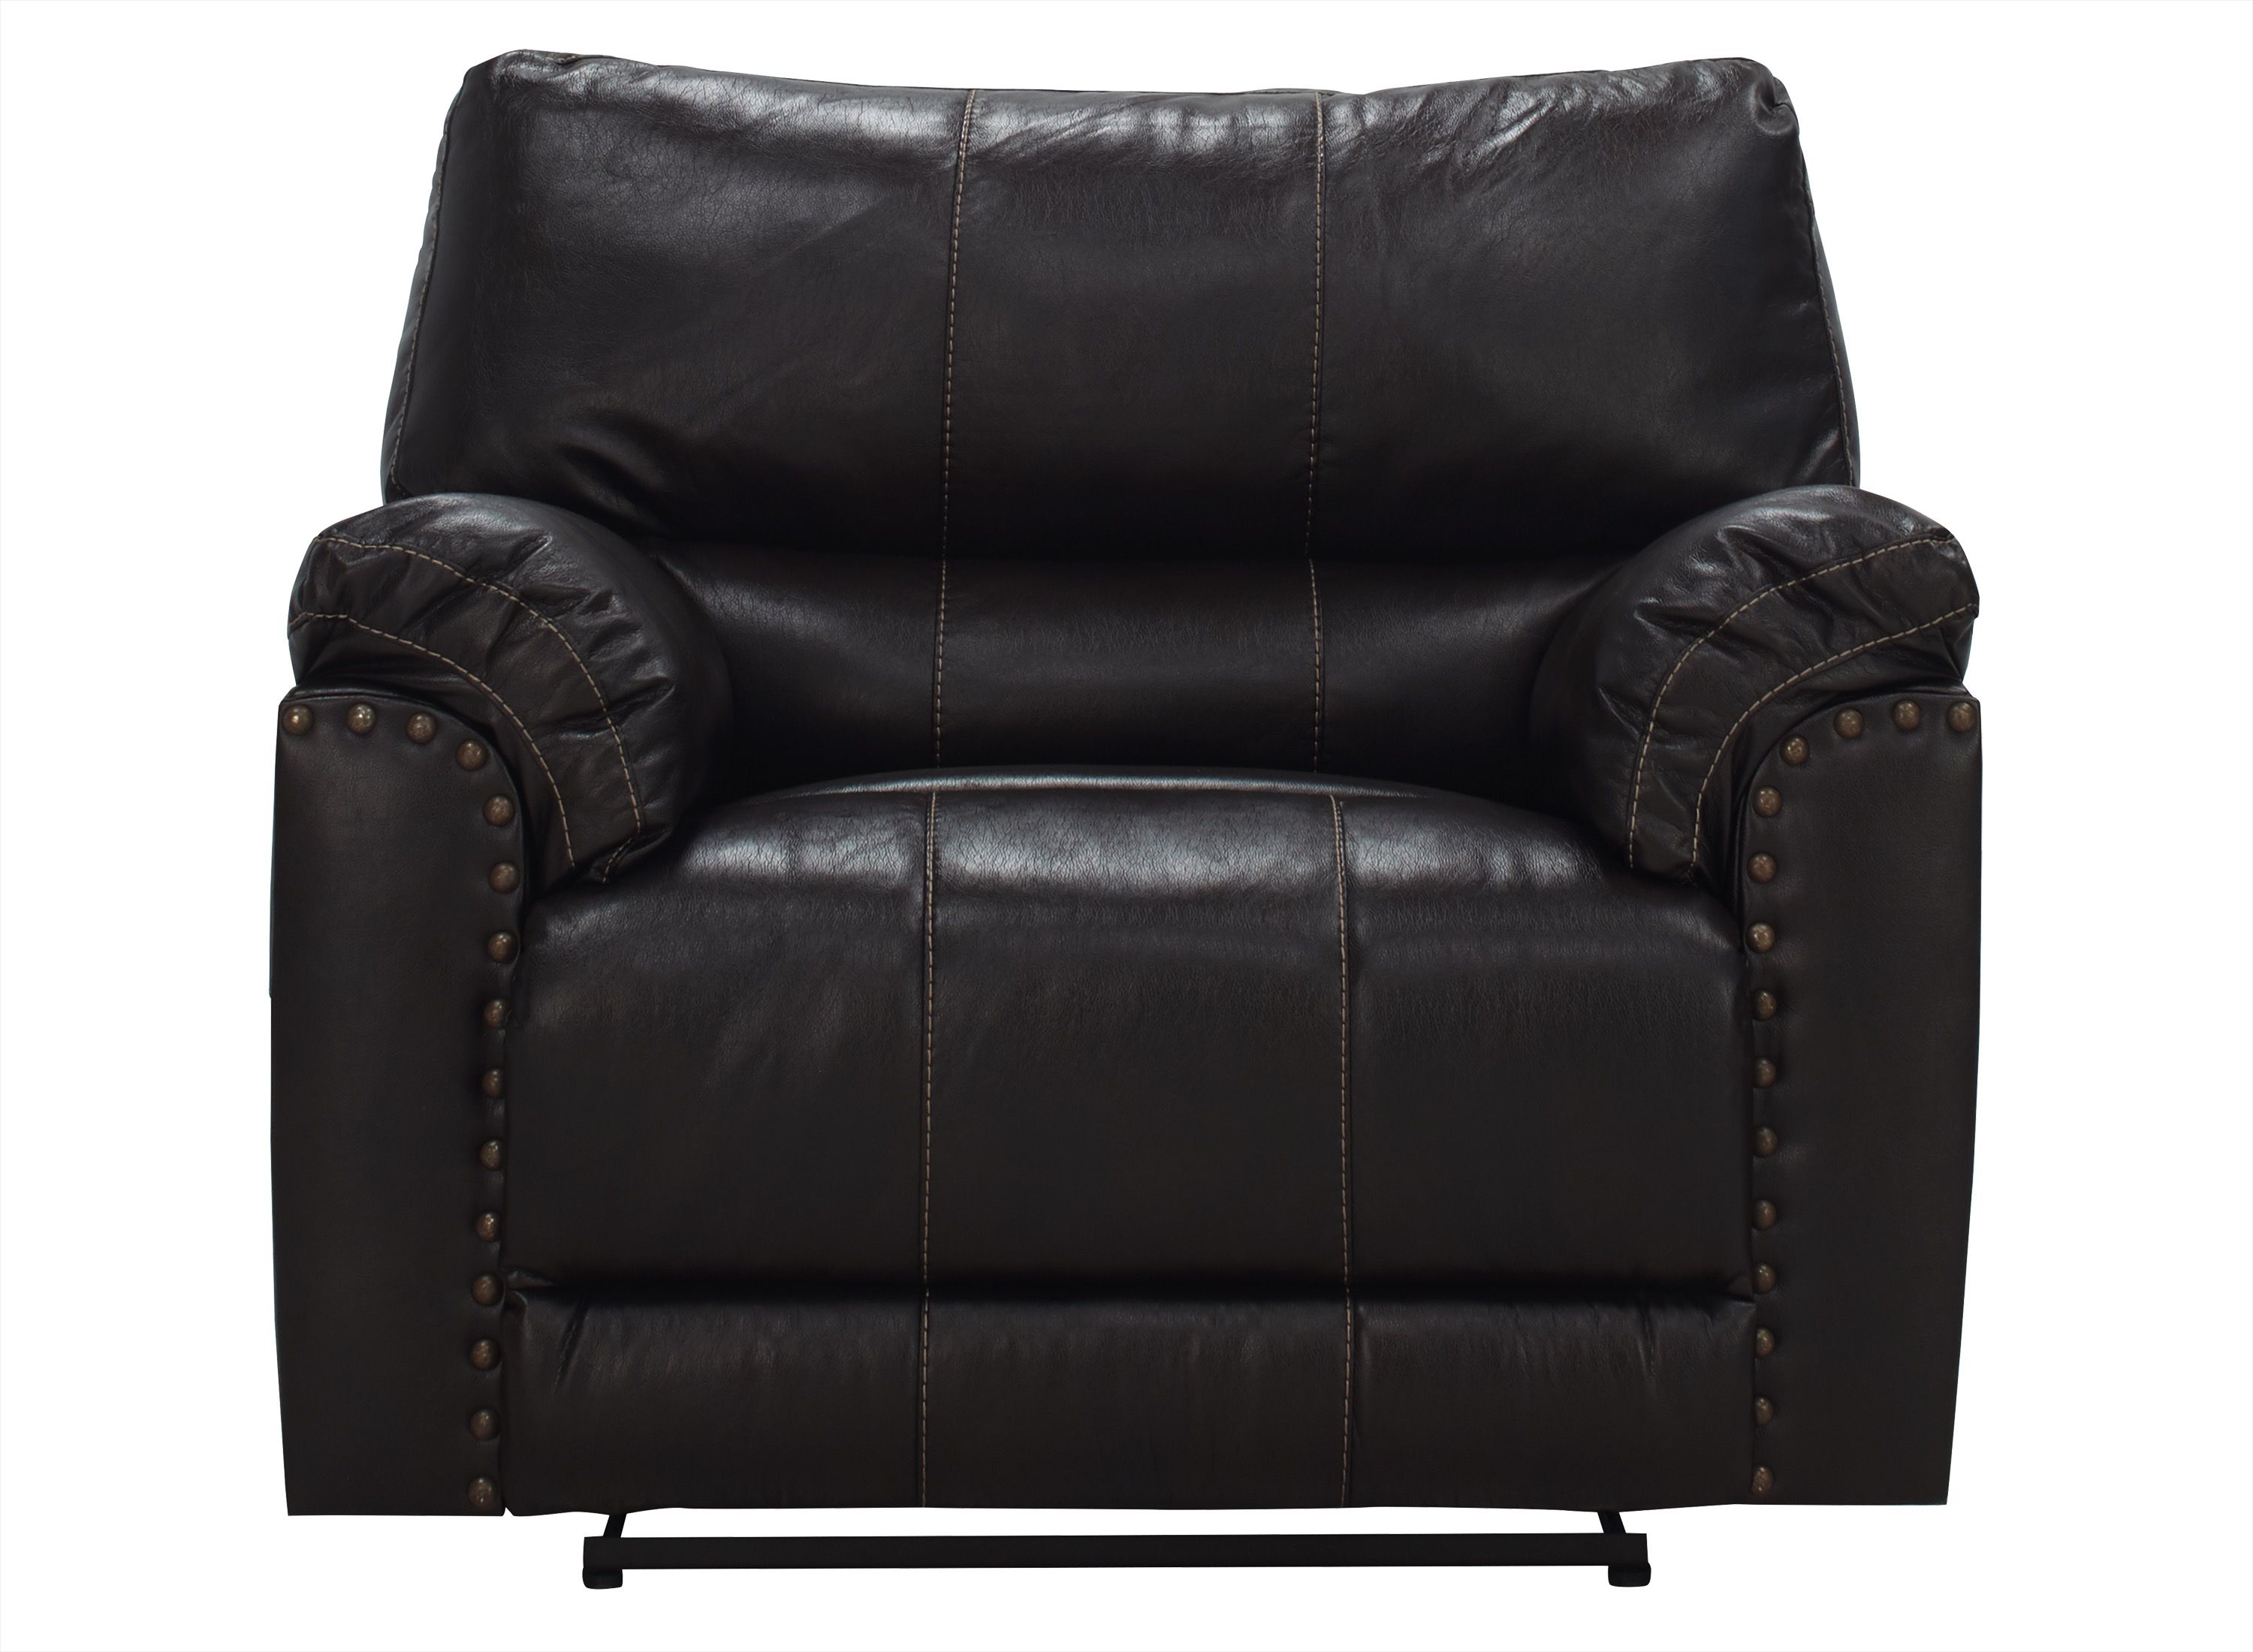 Waldron Wallaway Recliner Raymour, Raymour And Flanigan Leather Recliners